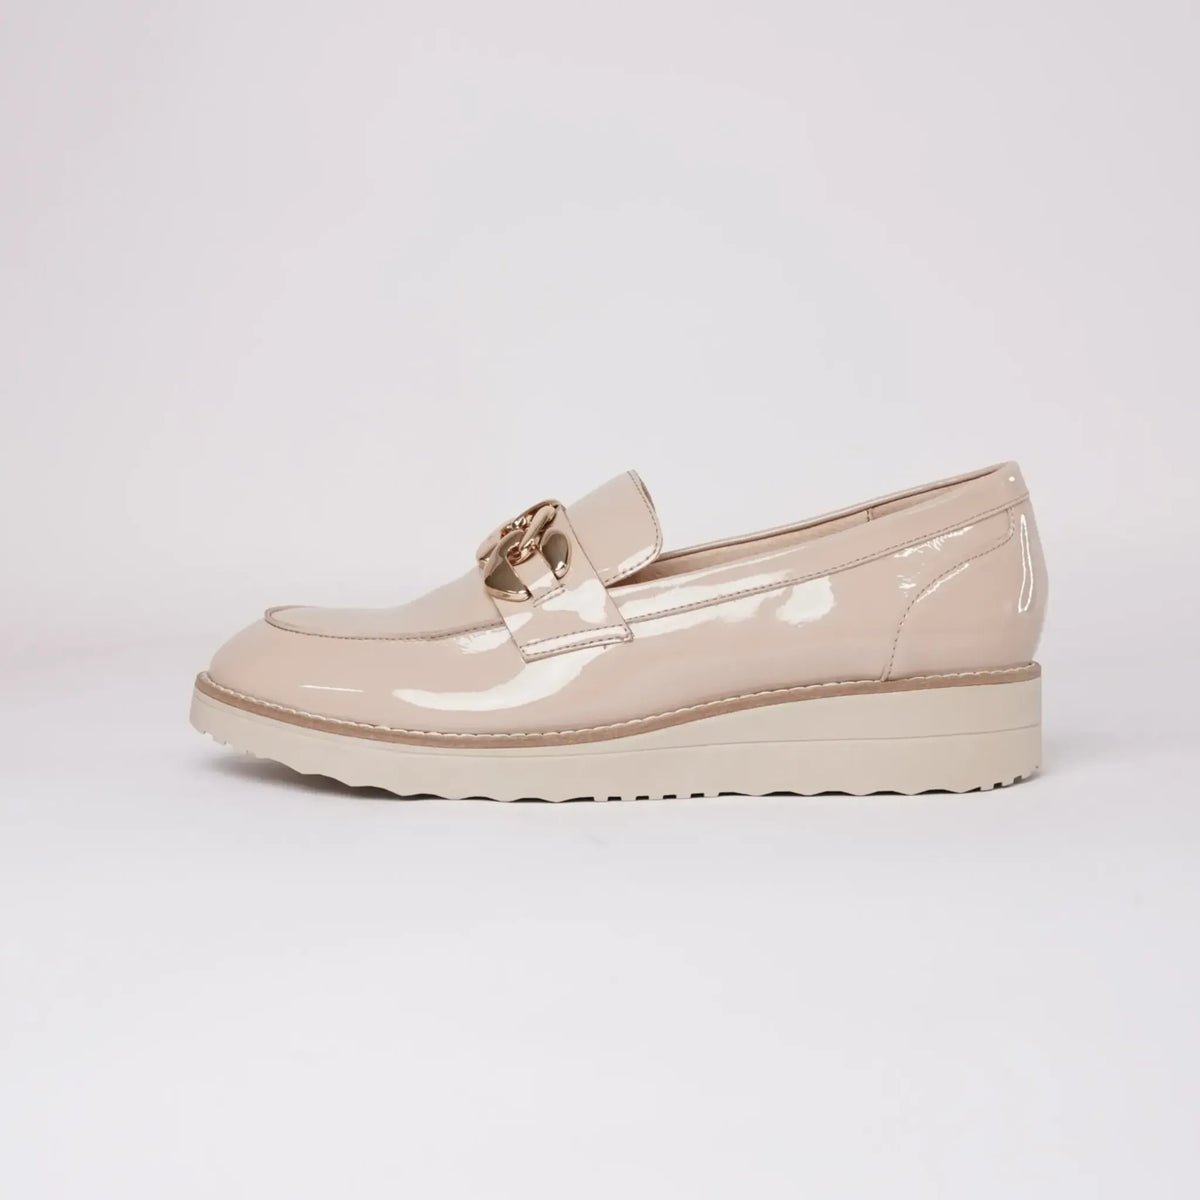 Ozama Cafe Patent Leather Loafers